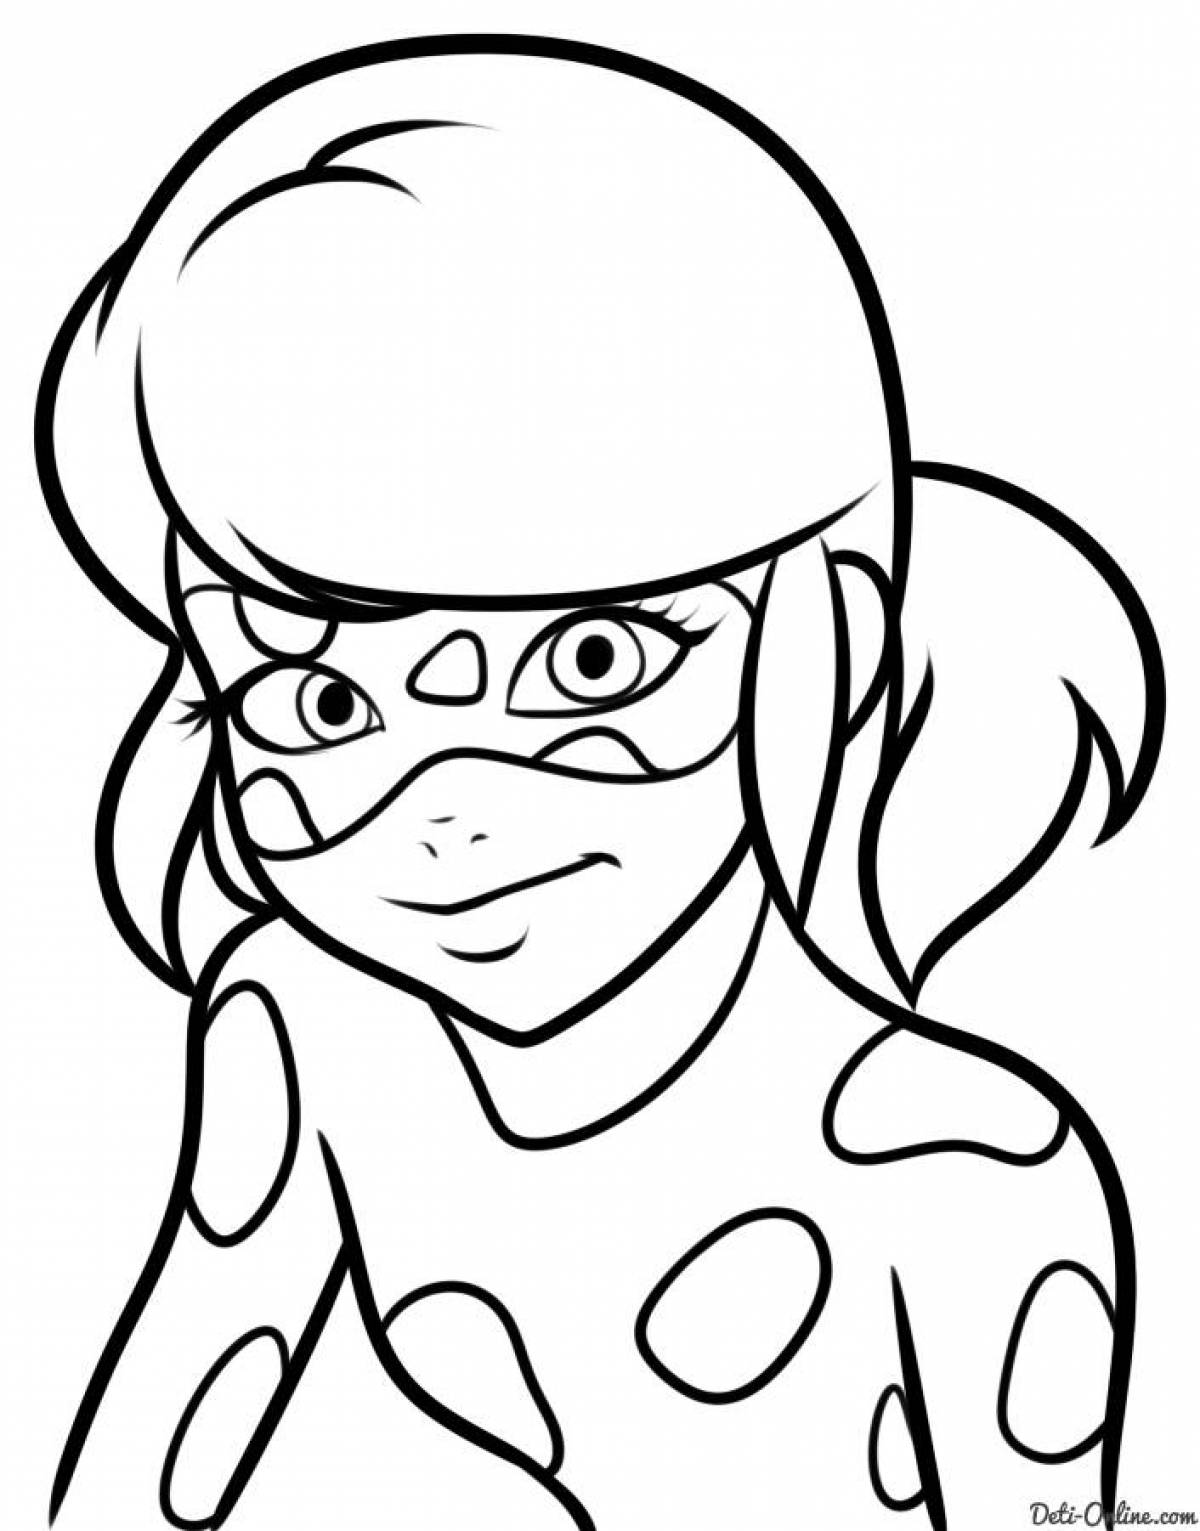 Marinette shining coloring page